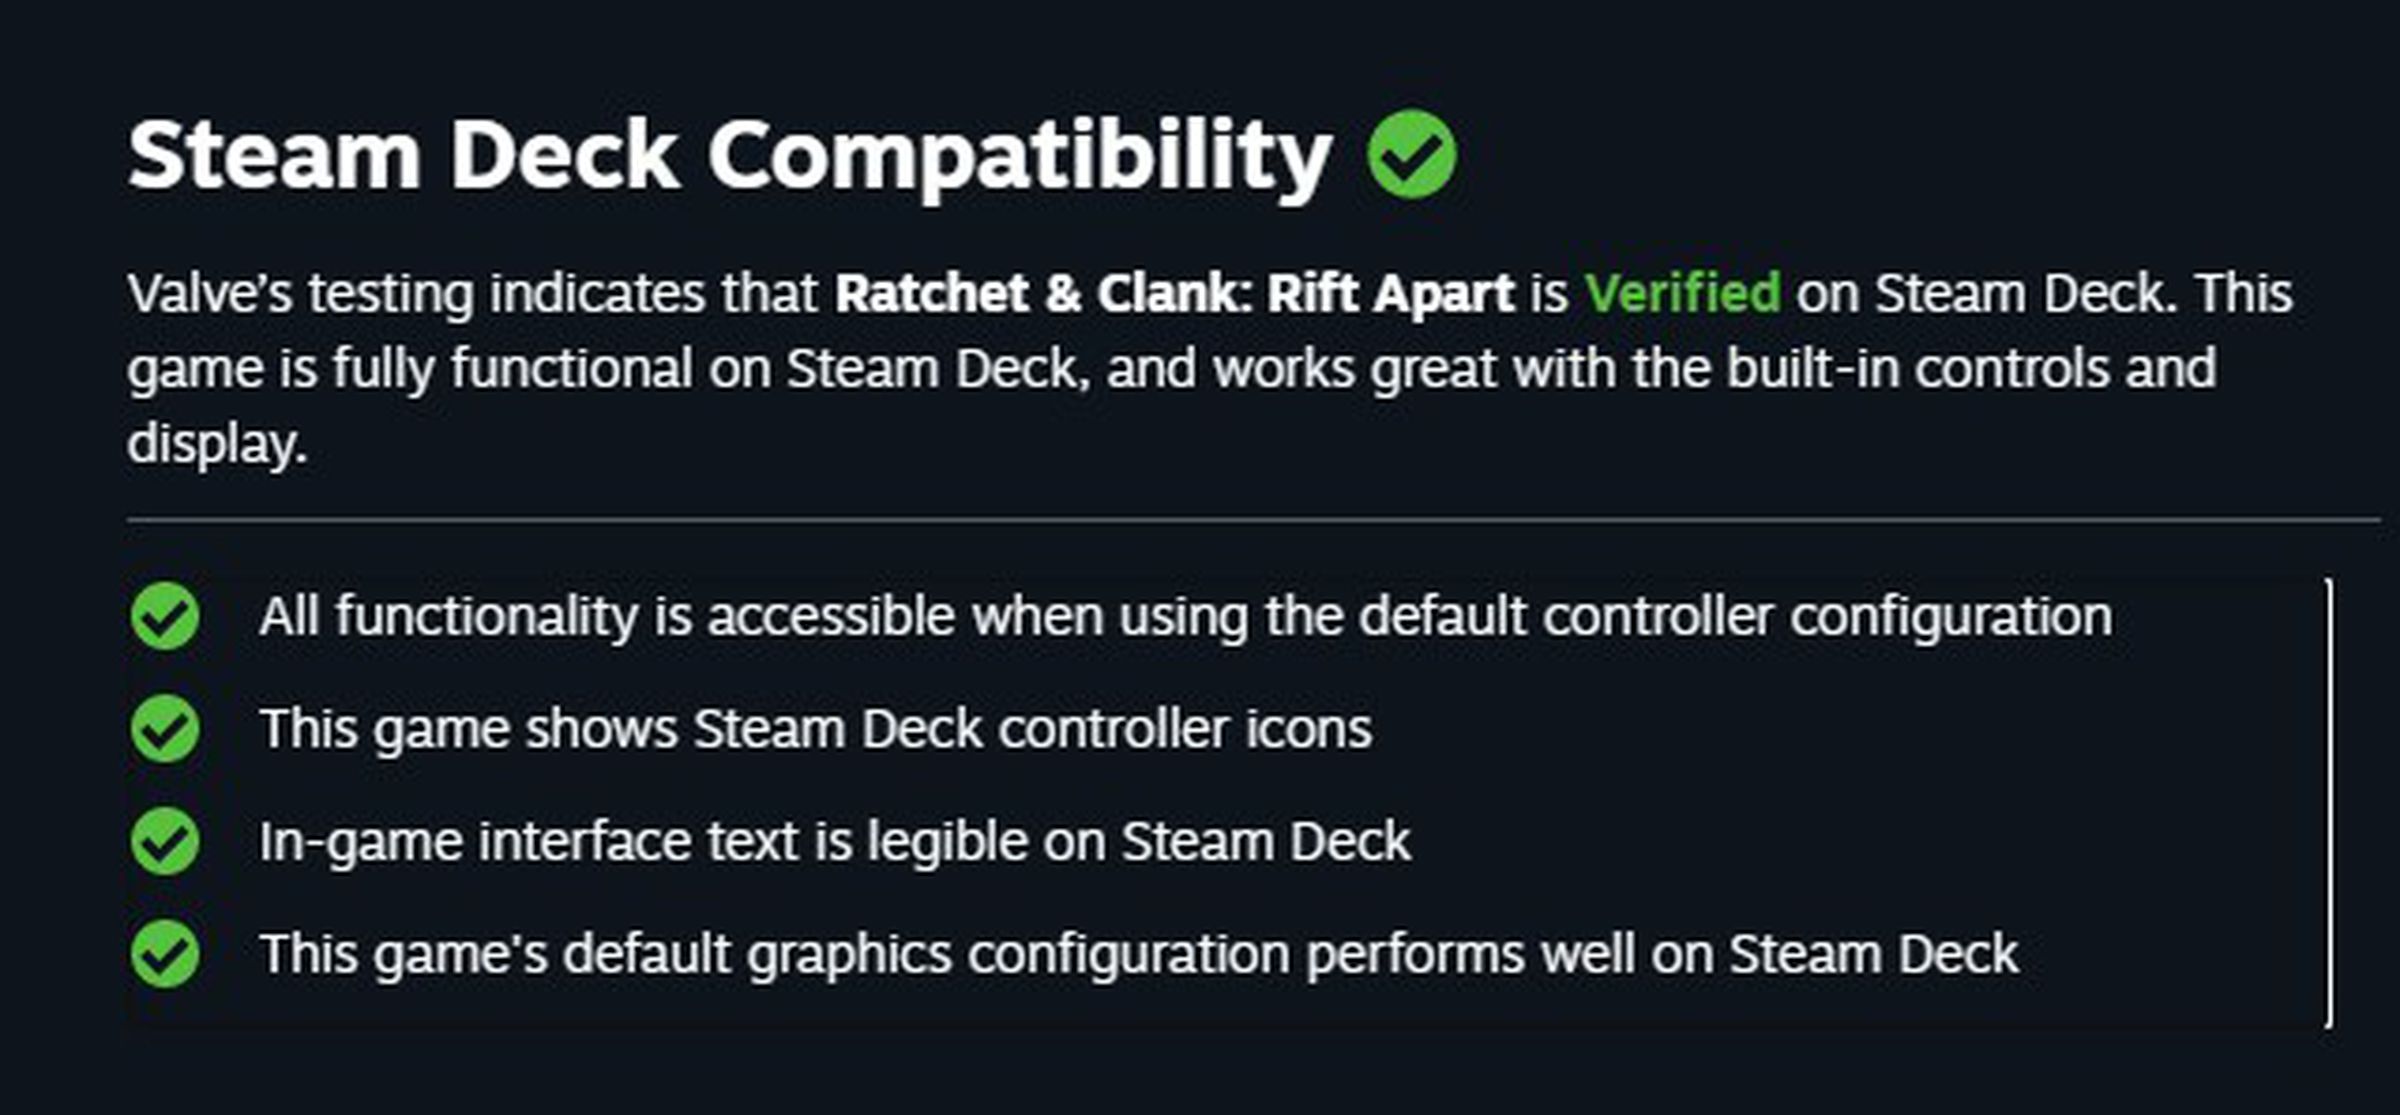 This game’s default graphics configuration performs well on Steam Deck